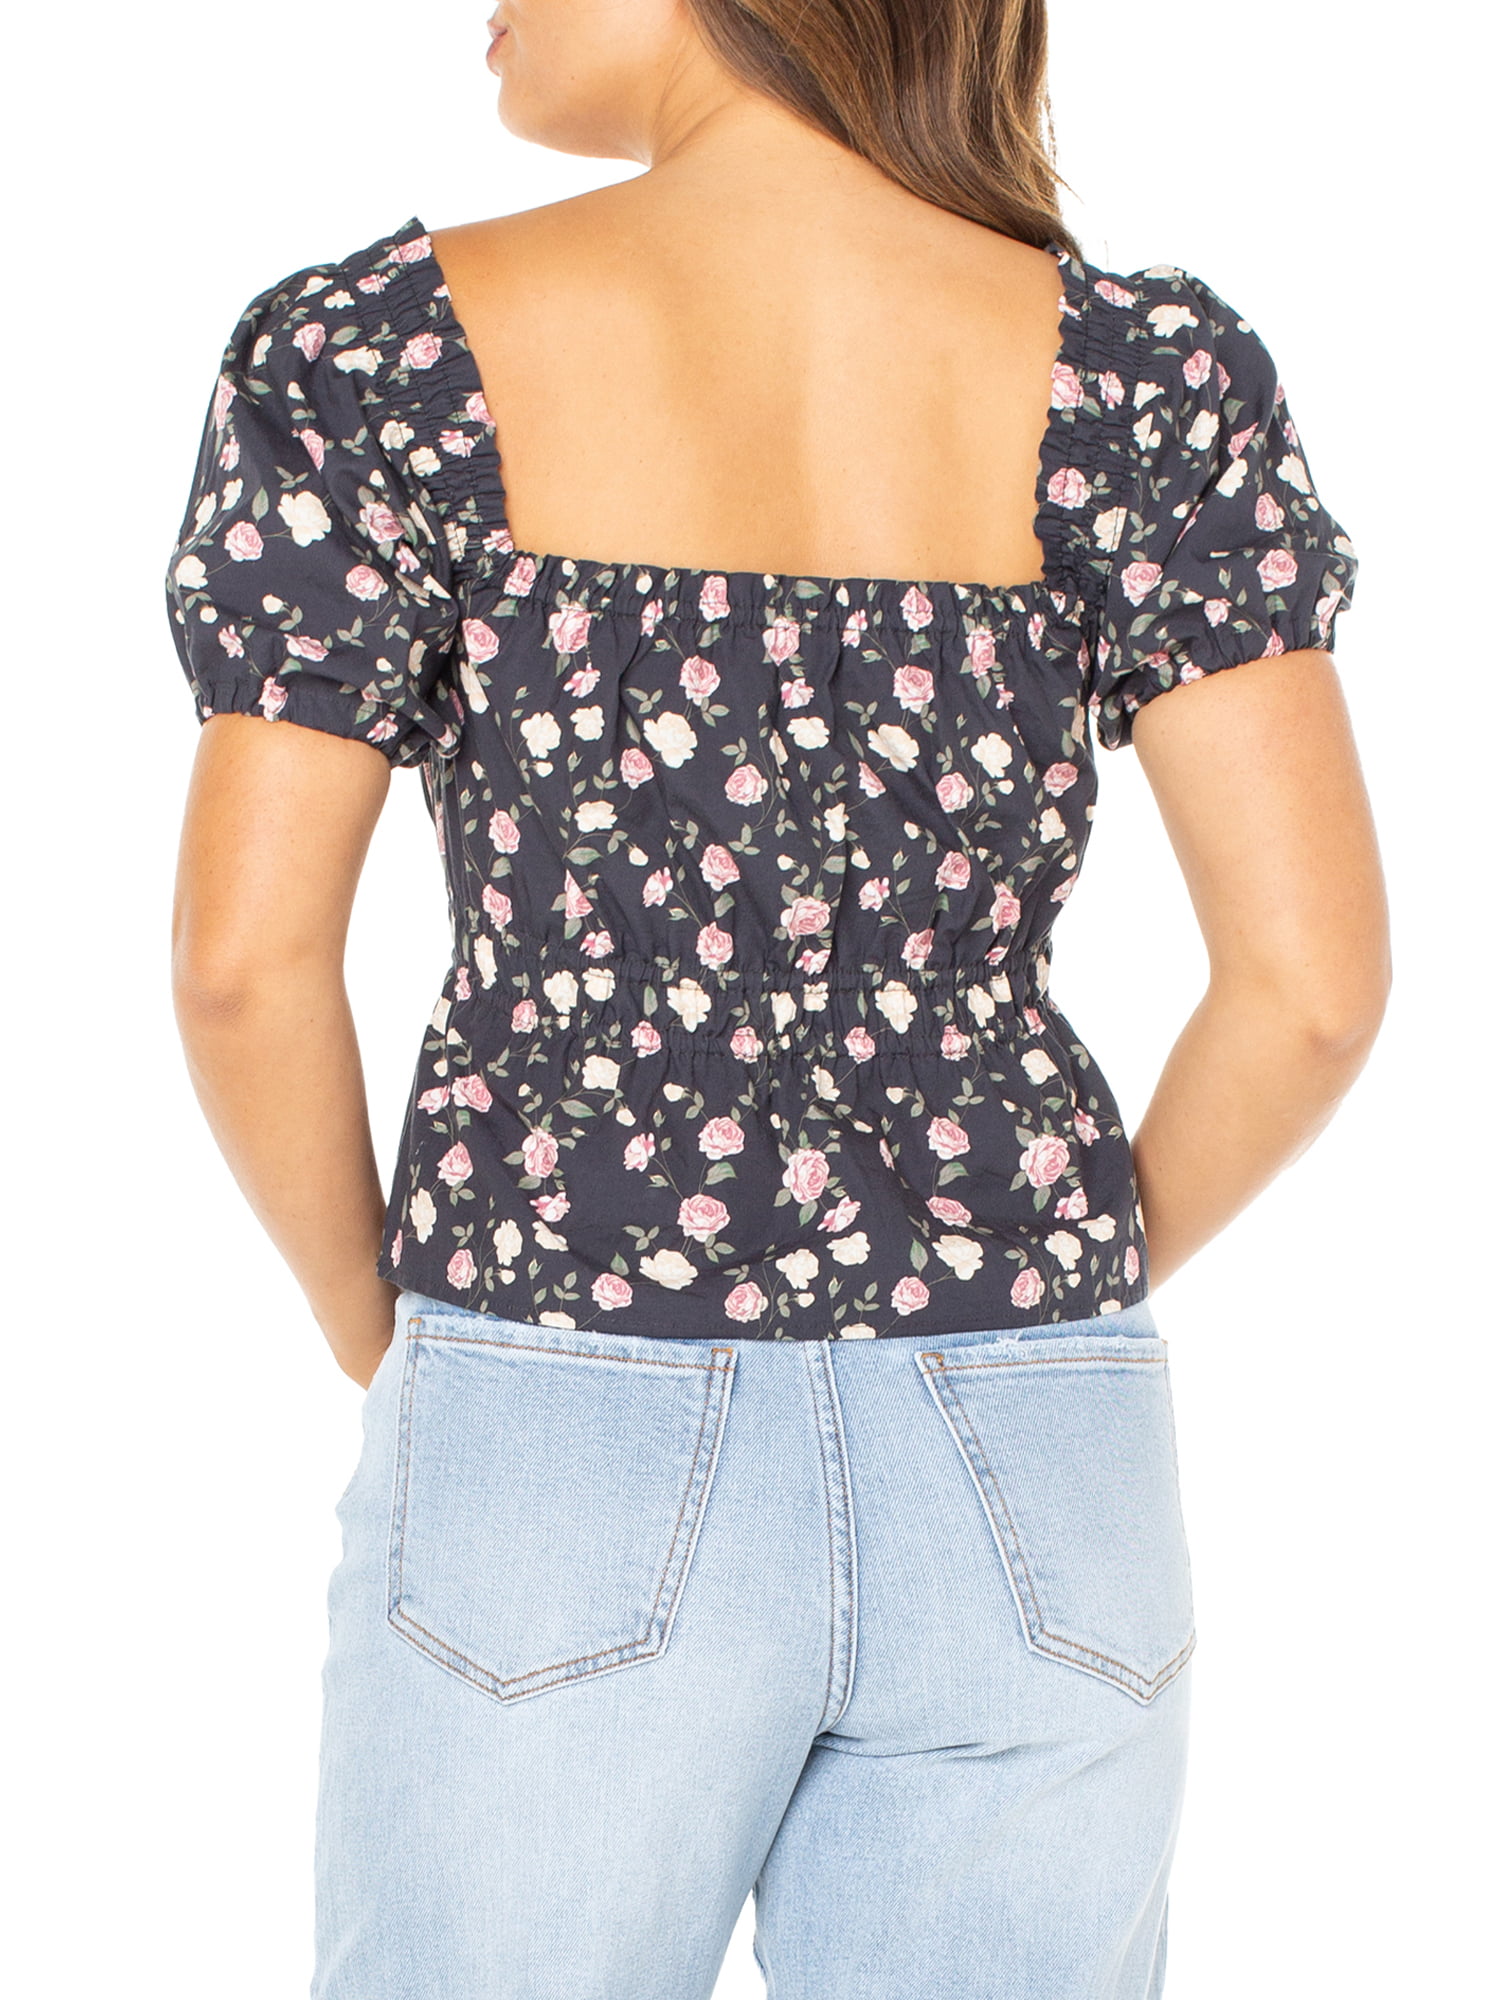 Celebrity Pink Juniors' Floral Top with Puff Sleeves, Sizes XS